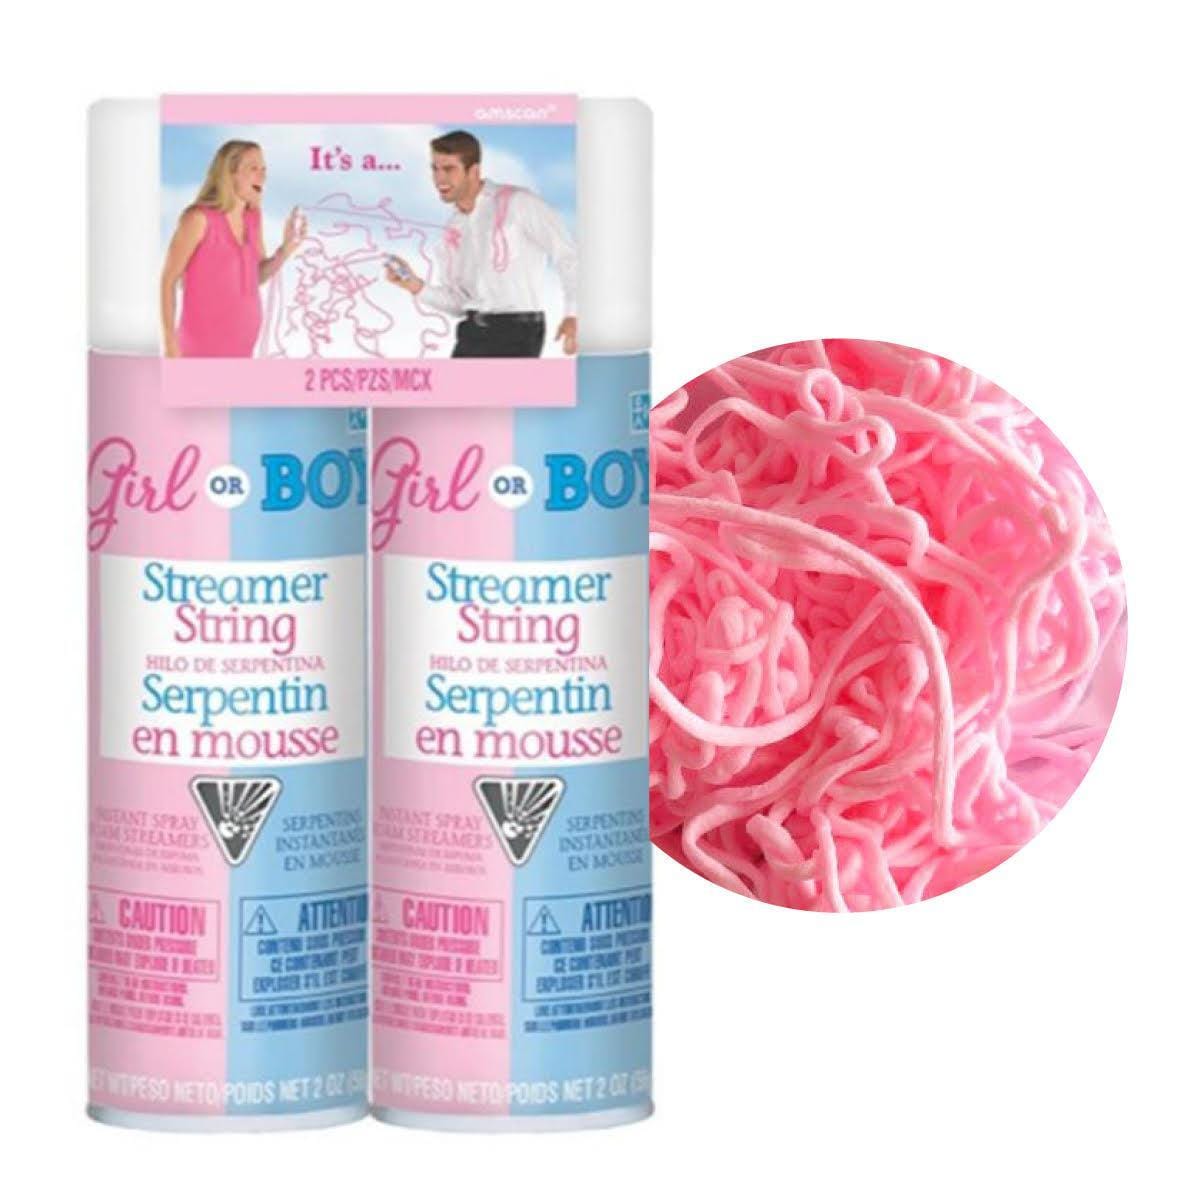 Buy Baby Shower Pink gender reveal string streamers, 2 per package sold at Party Expert